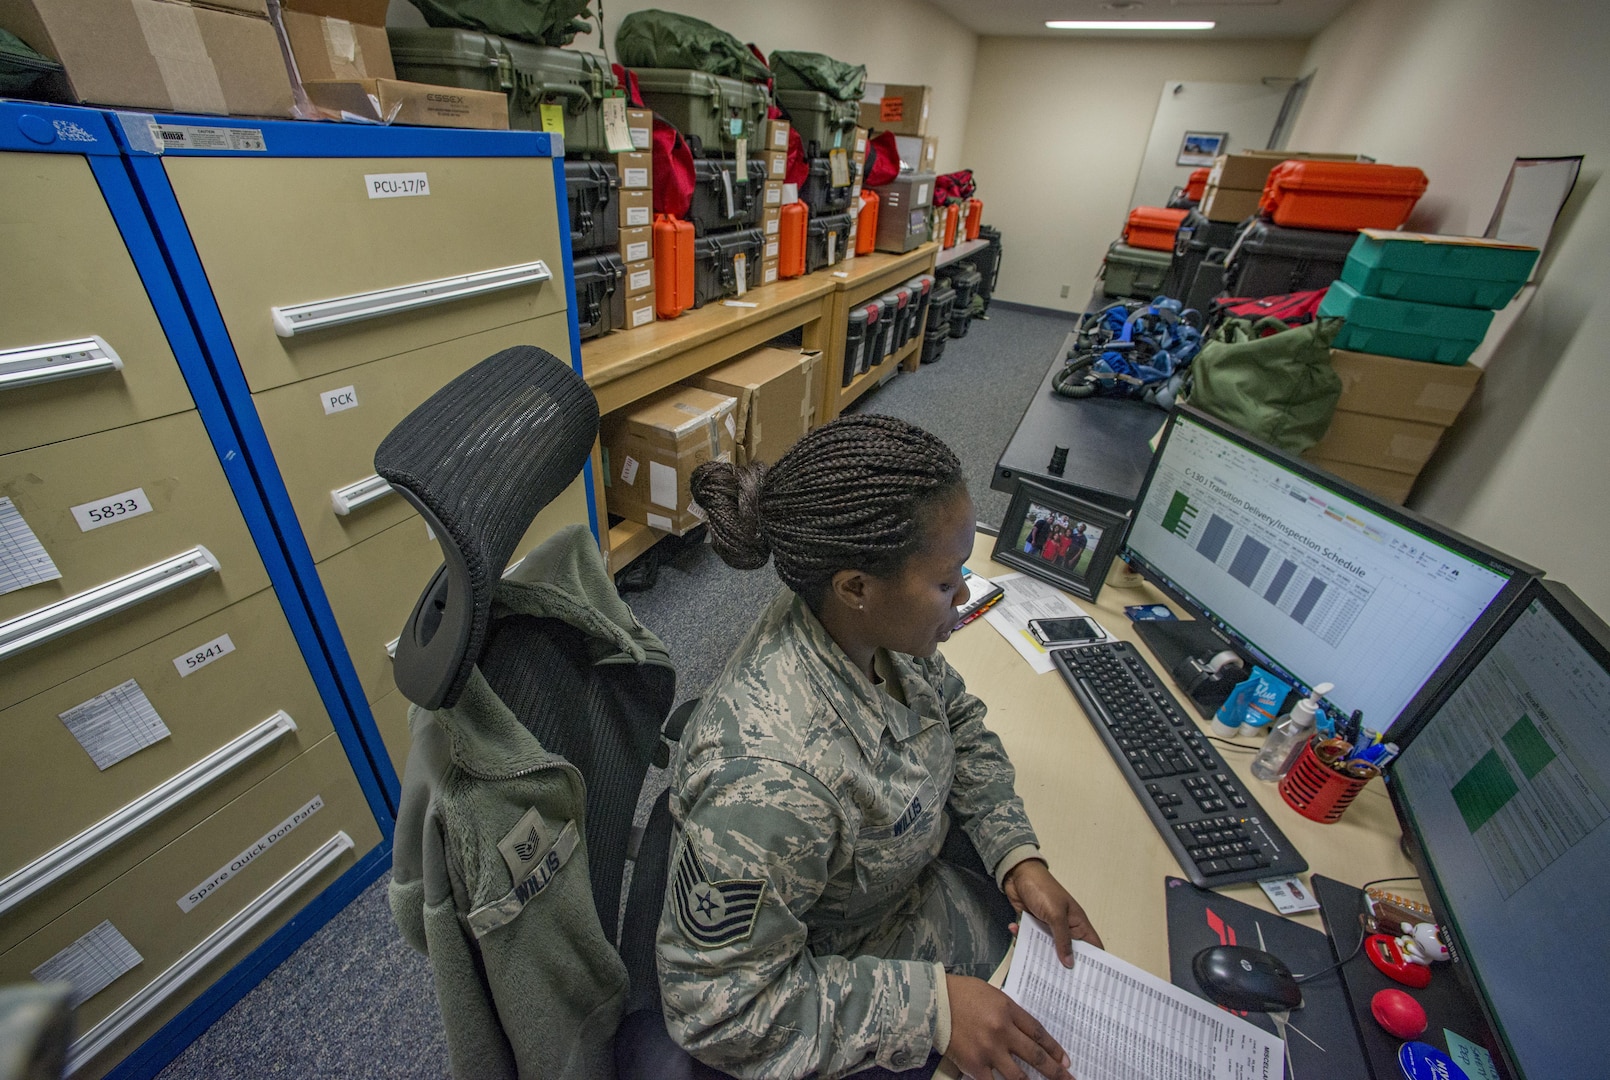 Tech Sgt. Shakuntala M. Willis, 374th Operations Support Squadron Aircrew Flight Equipment flight NCO in charge of the C-130J transition, works at her desk surrounded by the survival and life-support equipment she is in charge of Jan. 25, 2017, at Yokota Air Base, Japan. The AFE flight has been preparing aircrew survival and life-support equipment for the arrival of the new C-130J Super Hercules since May 2016. (U.S. Air Force photo by Airman 1st Class Donald Hudson)